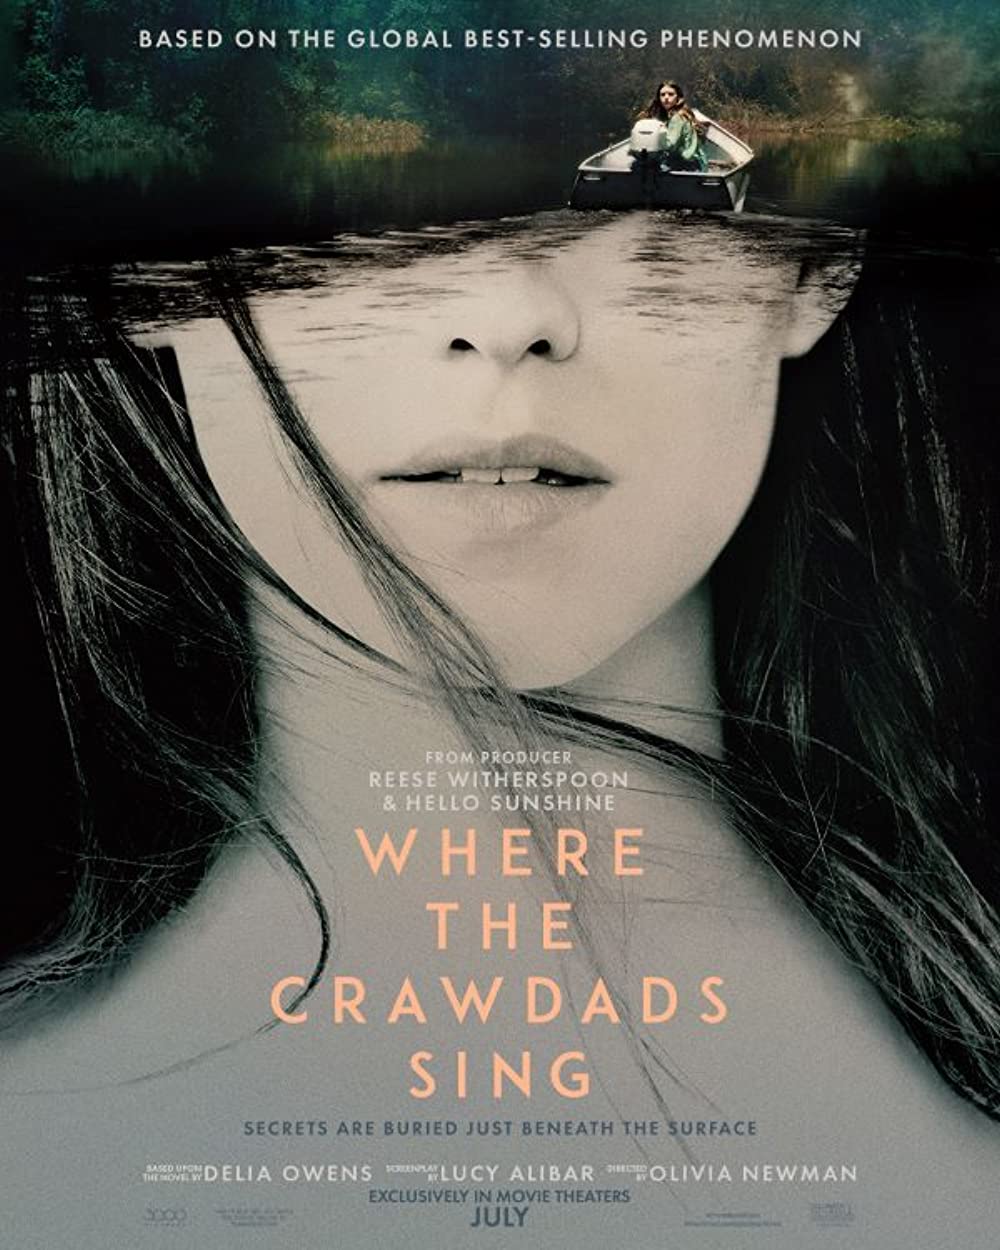 Film Poster for WHERE THE CRAWDADS SING